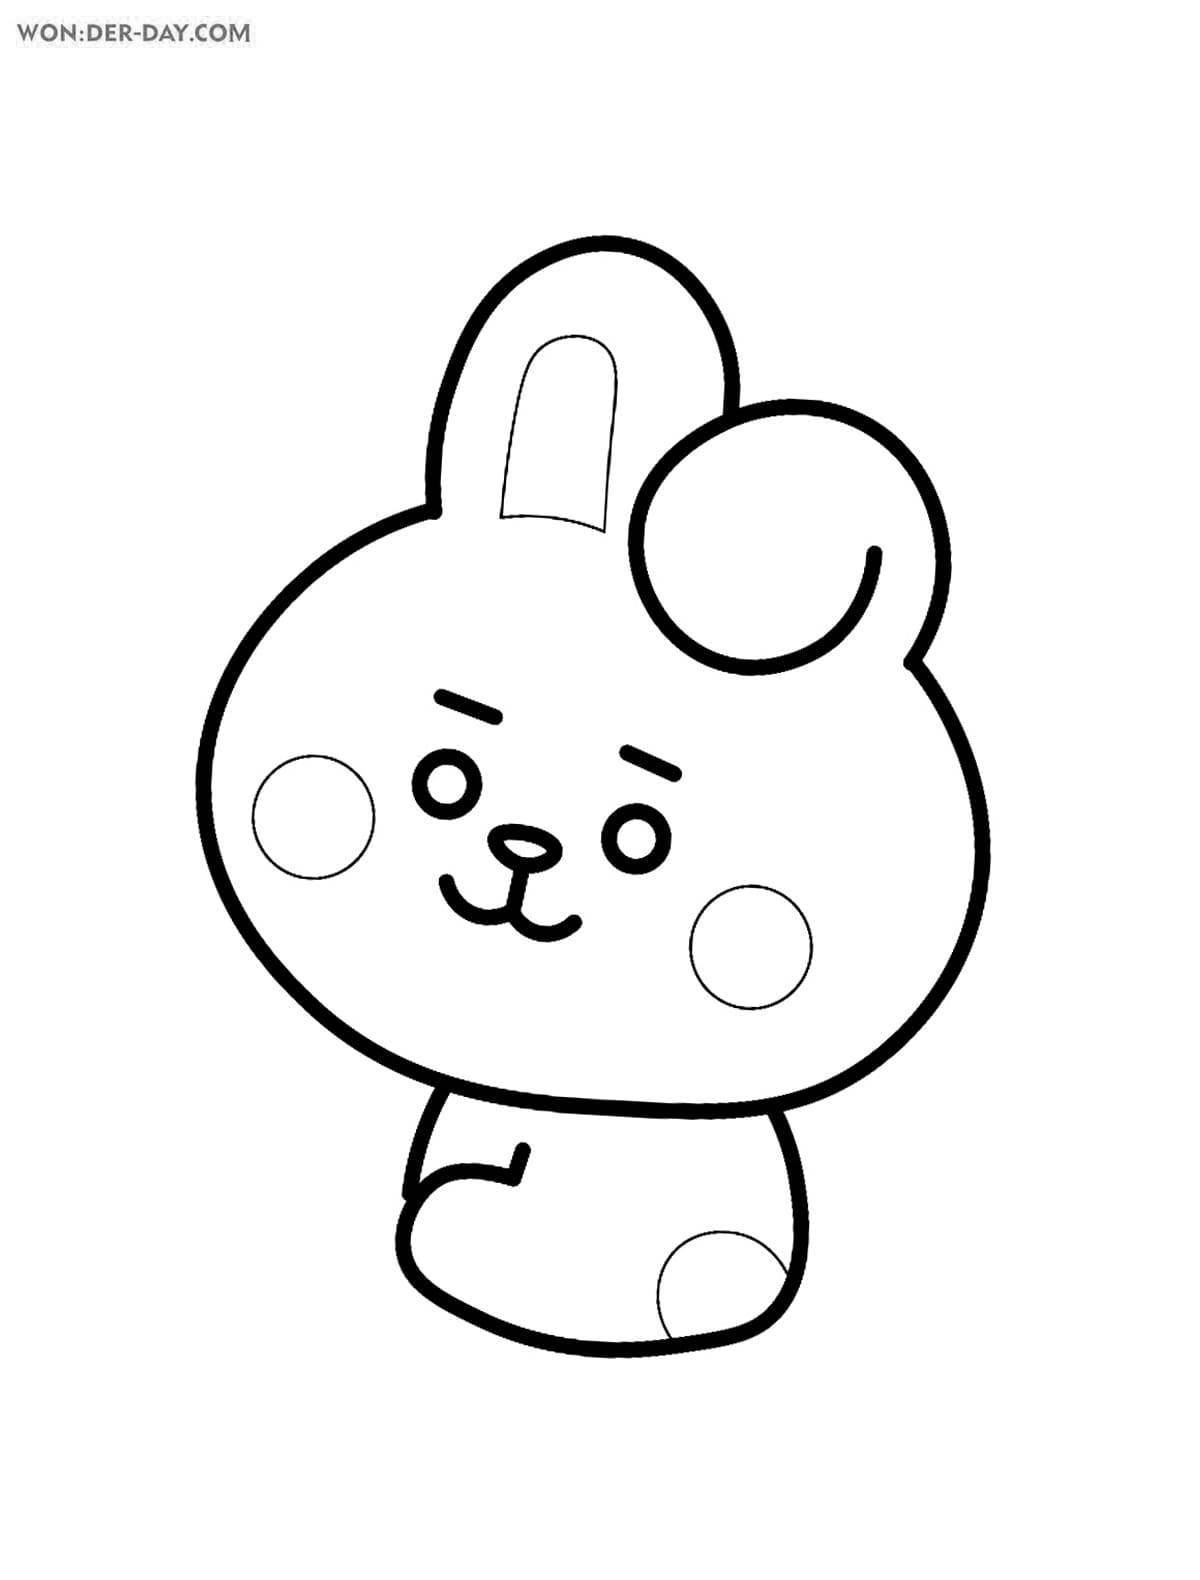 Bright coloring bt21